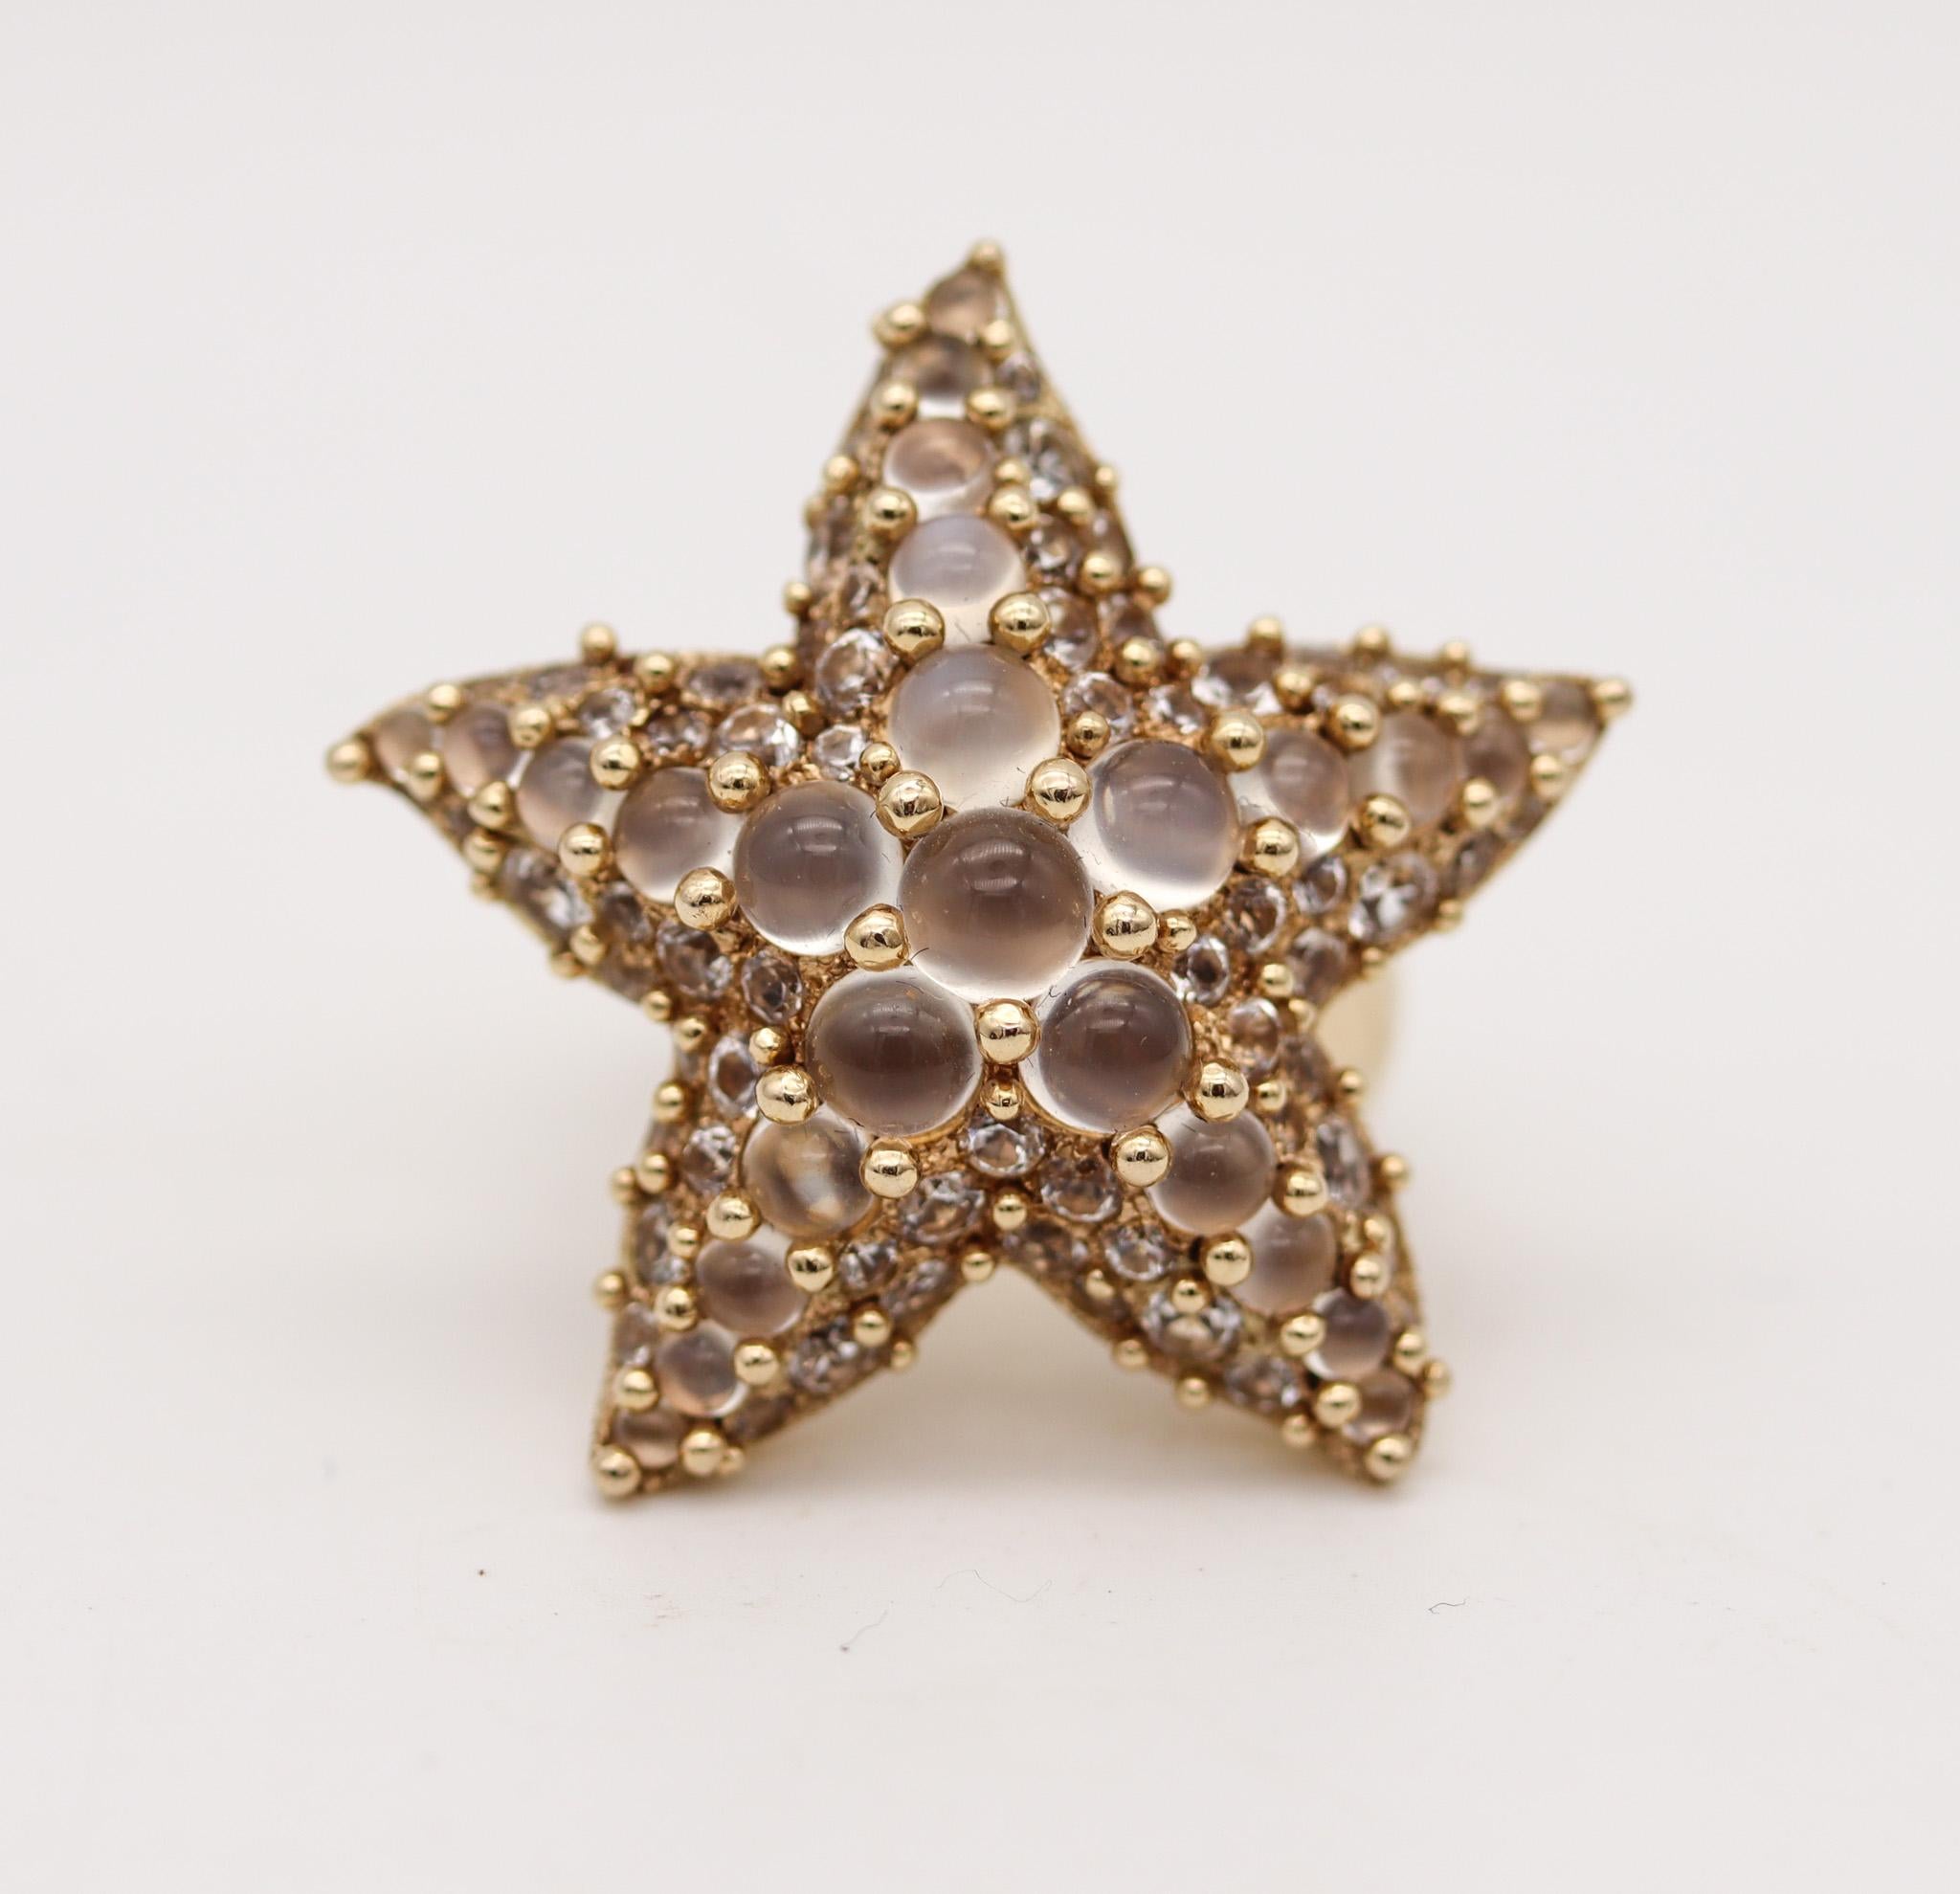 Starfish cocktail ring designed by Pomellato.

Gorgeous cocktail ring, created in Milano Italy by the prestigious jewelry house of Pomellato. This rare artistic ring is from the Sirene (Mermaid in Italian) collection launched circa 2018. Has been